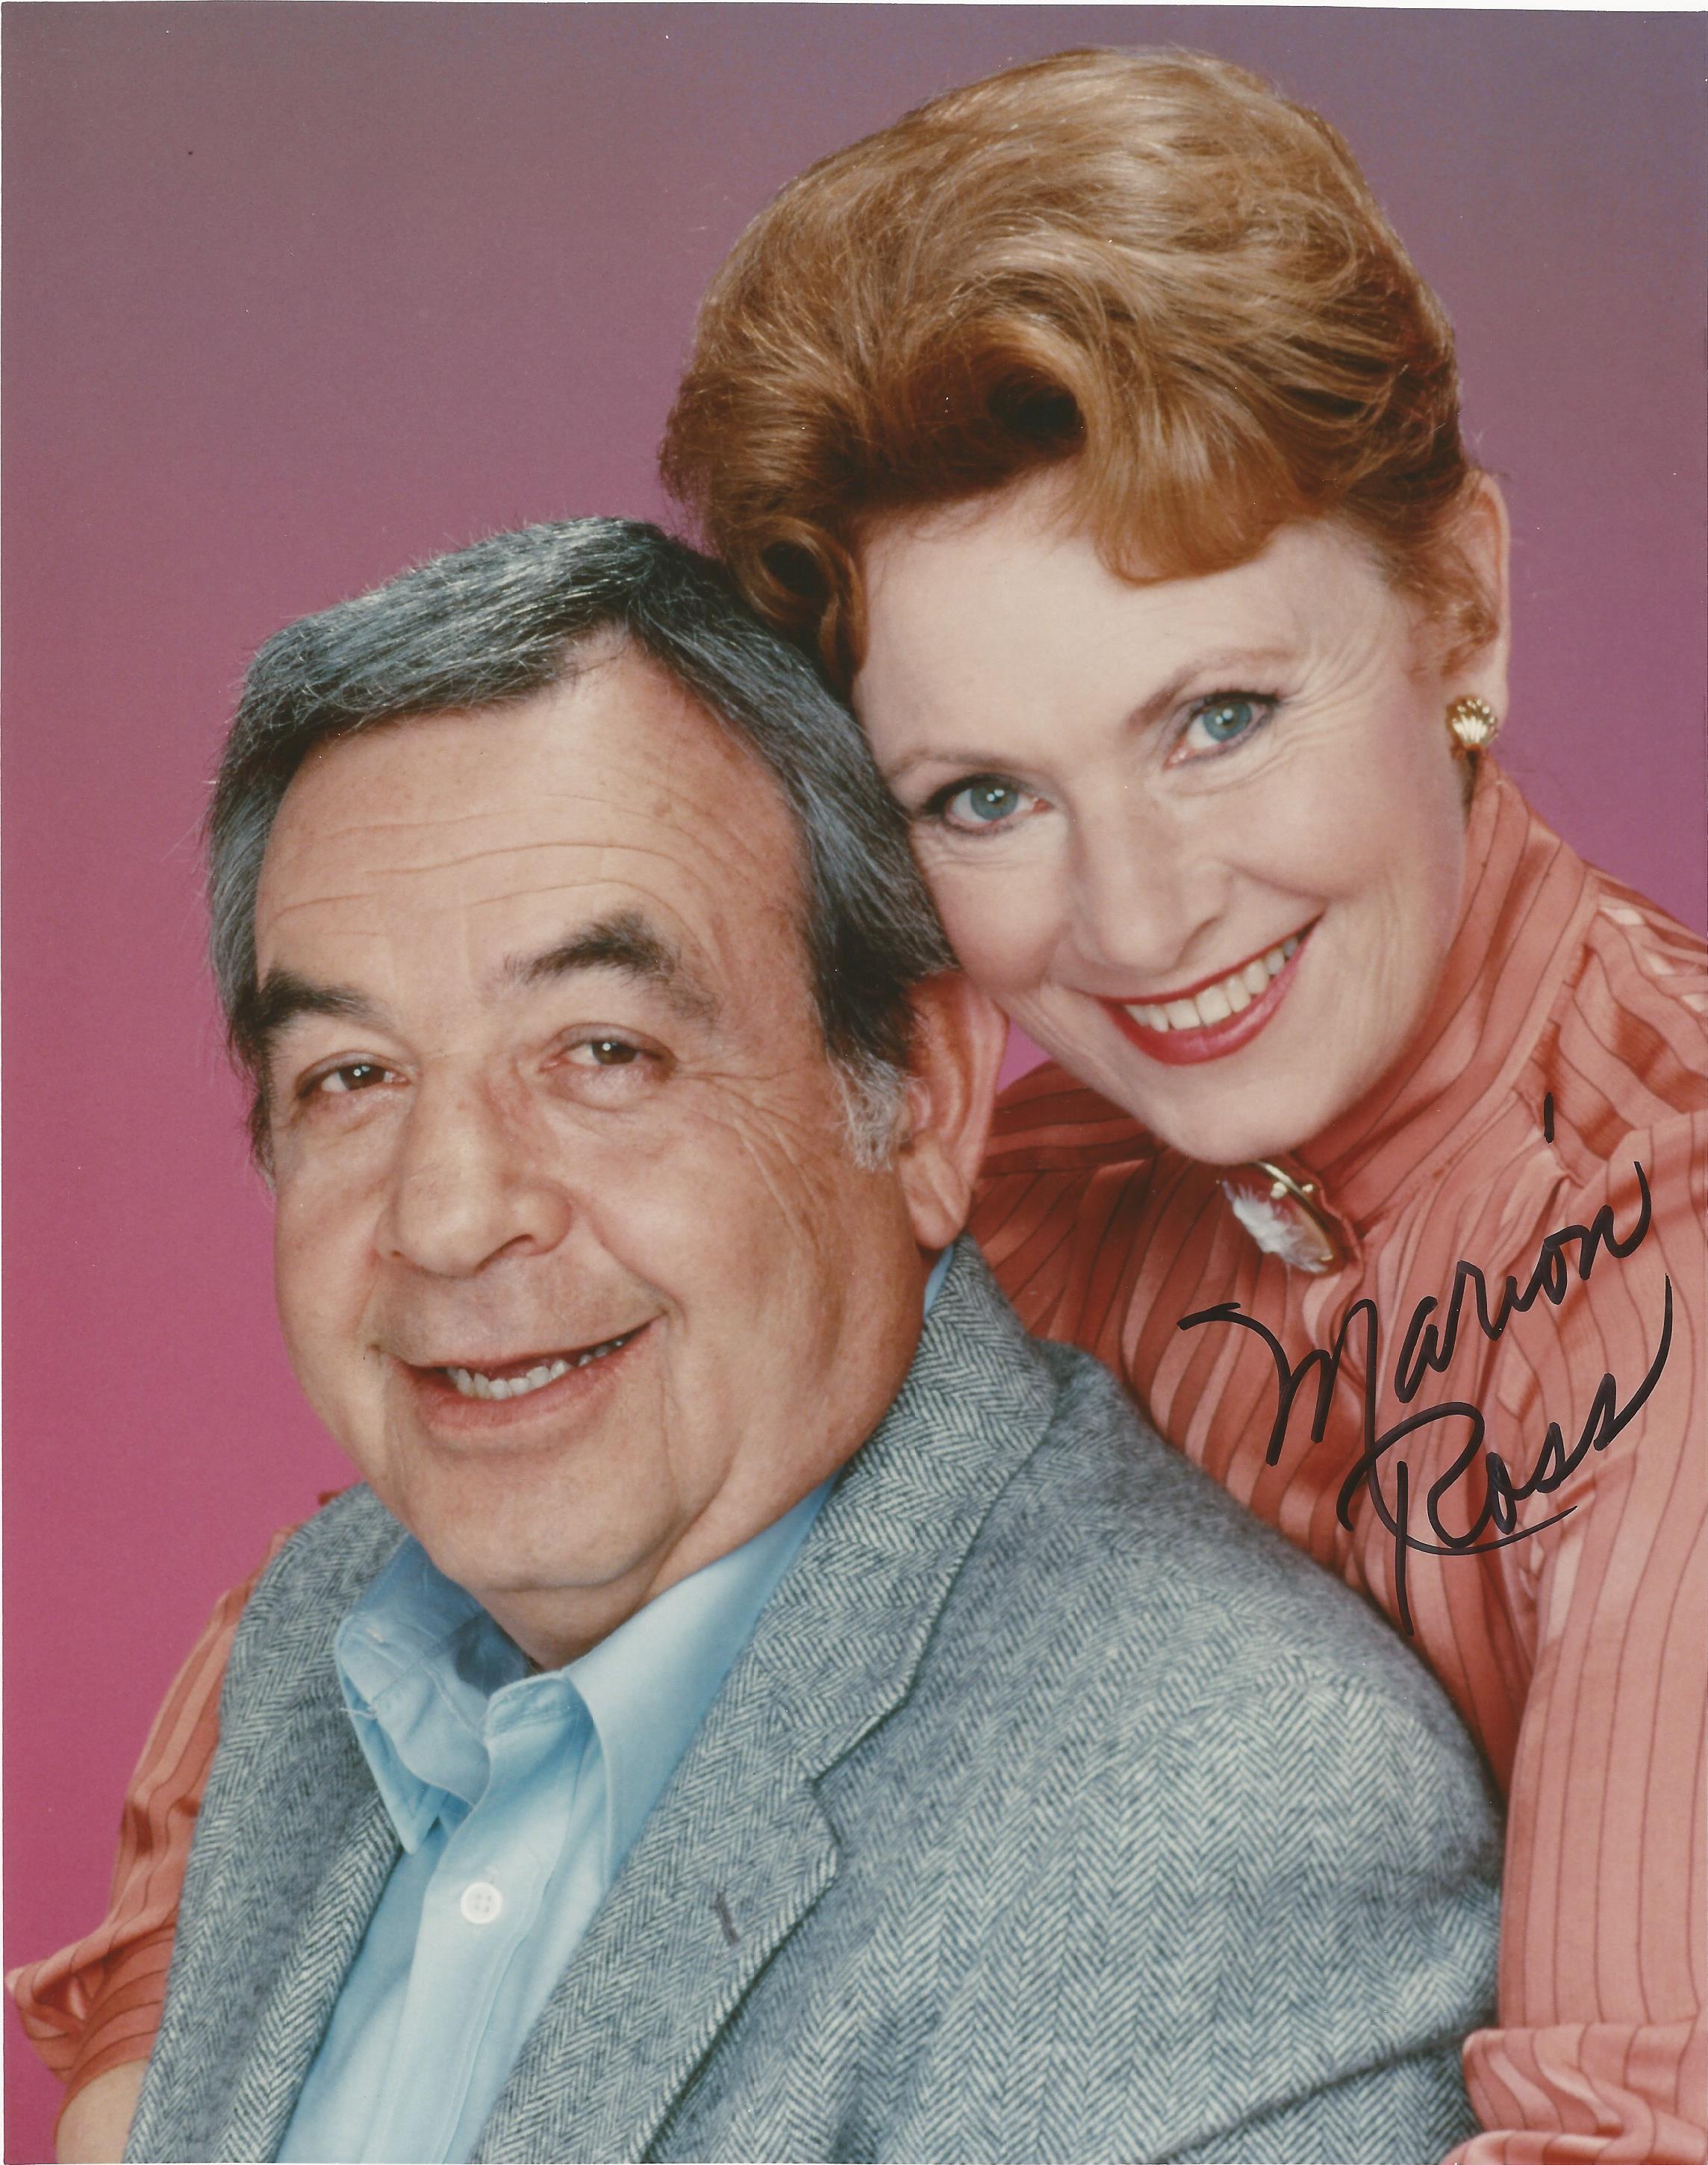 Actress Marion Ross signed 10x8 colour photo with her Happy Days co-star Tom Bosley. Marion Eileen